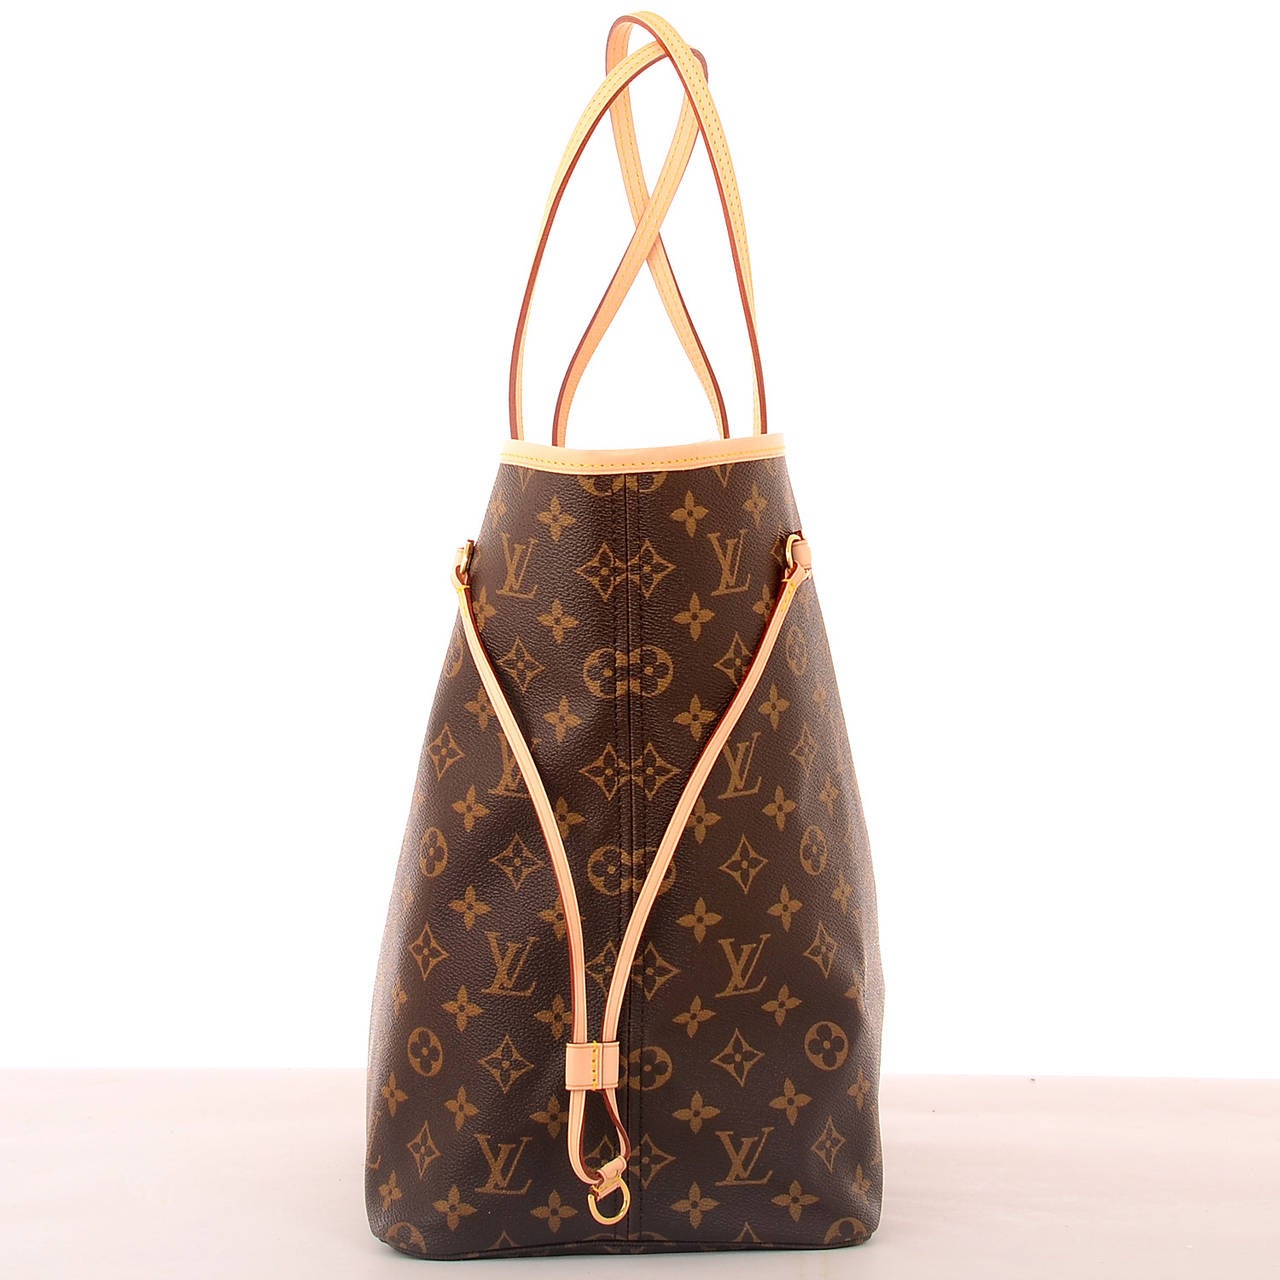 Louis Vuitton Monogram Mimosa Neo Neverfull GM of coated canvas with vachetta leather trim.

This classic tote features polished brass hardware, detachable zipper pouch, adjustable drawstring sides, hidden top hook closure and double flat shoulder